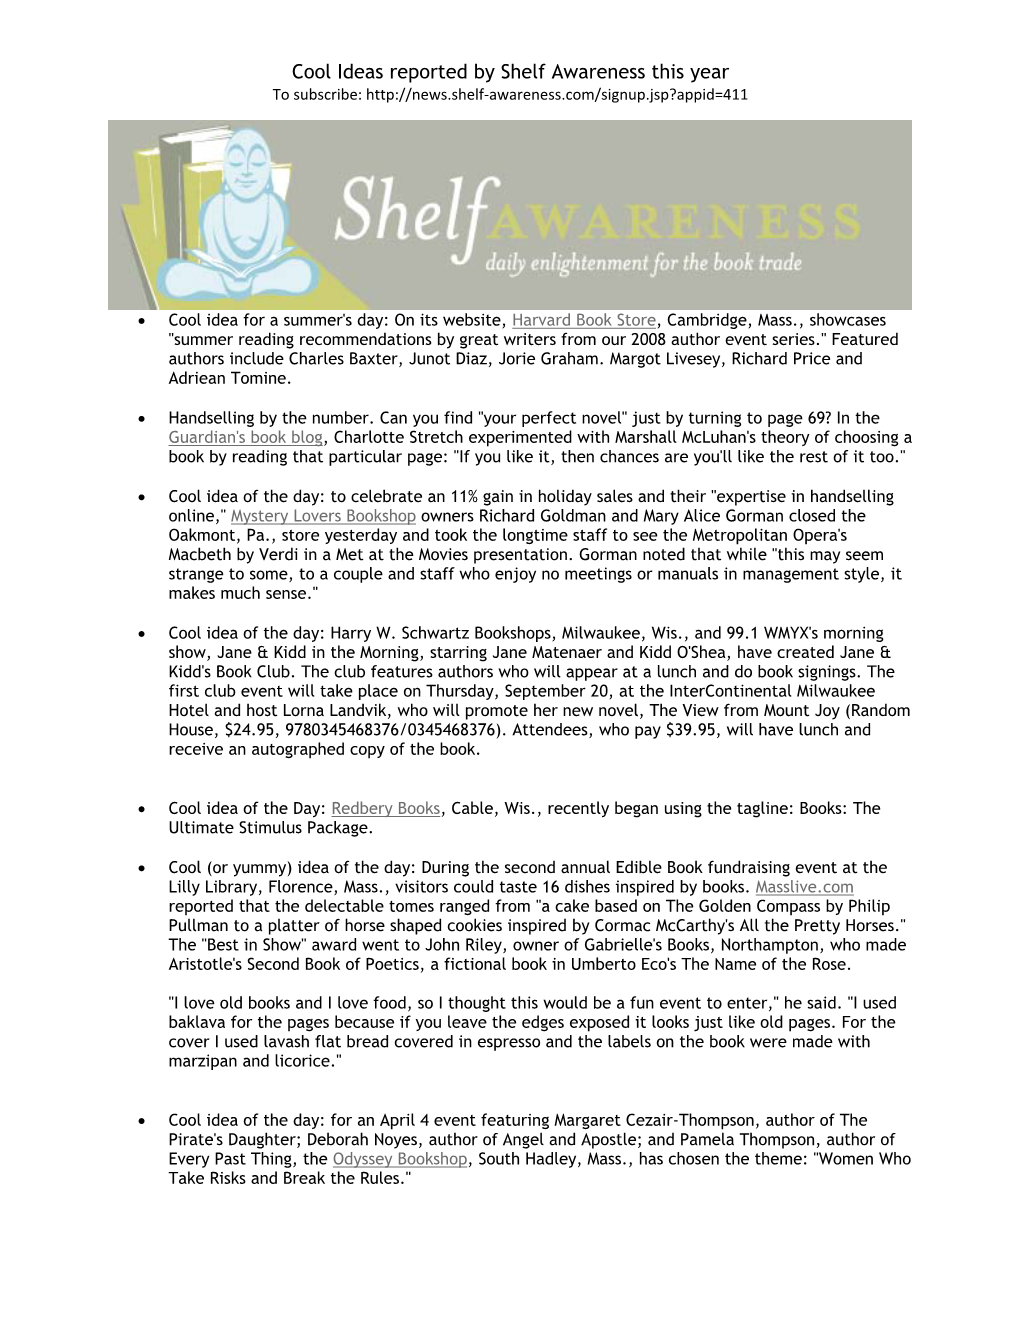 Cool Ideas Reported by Shelf Awareness This Year to Subscribe